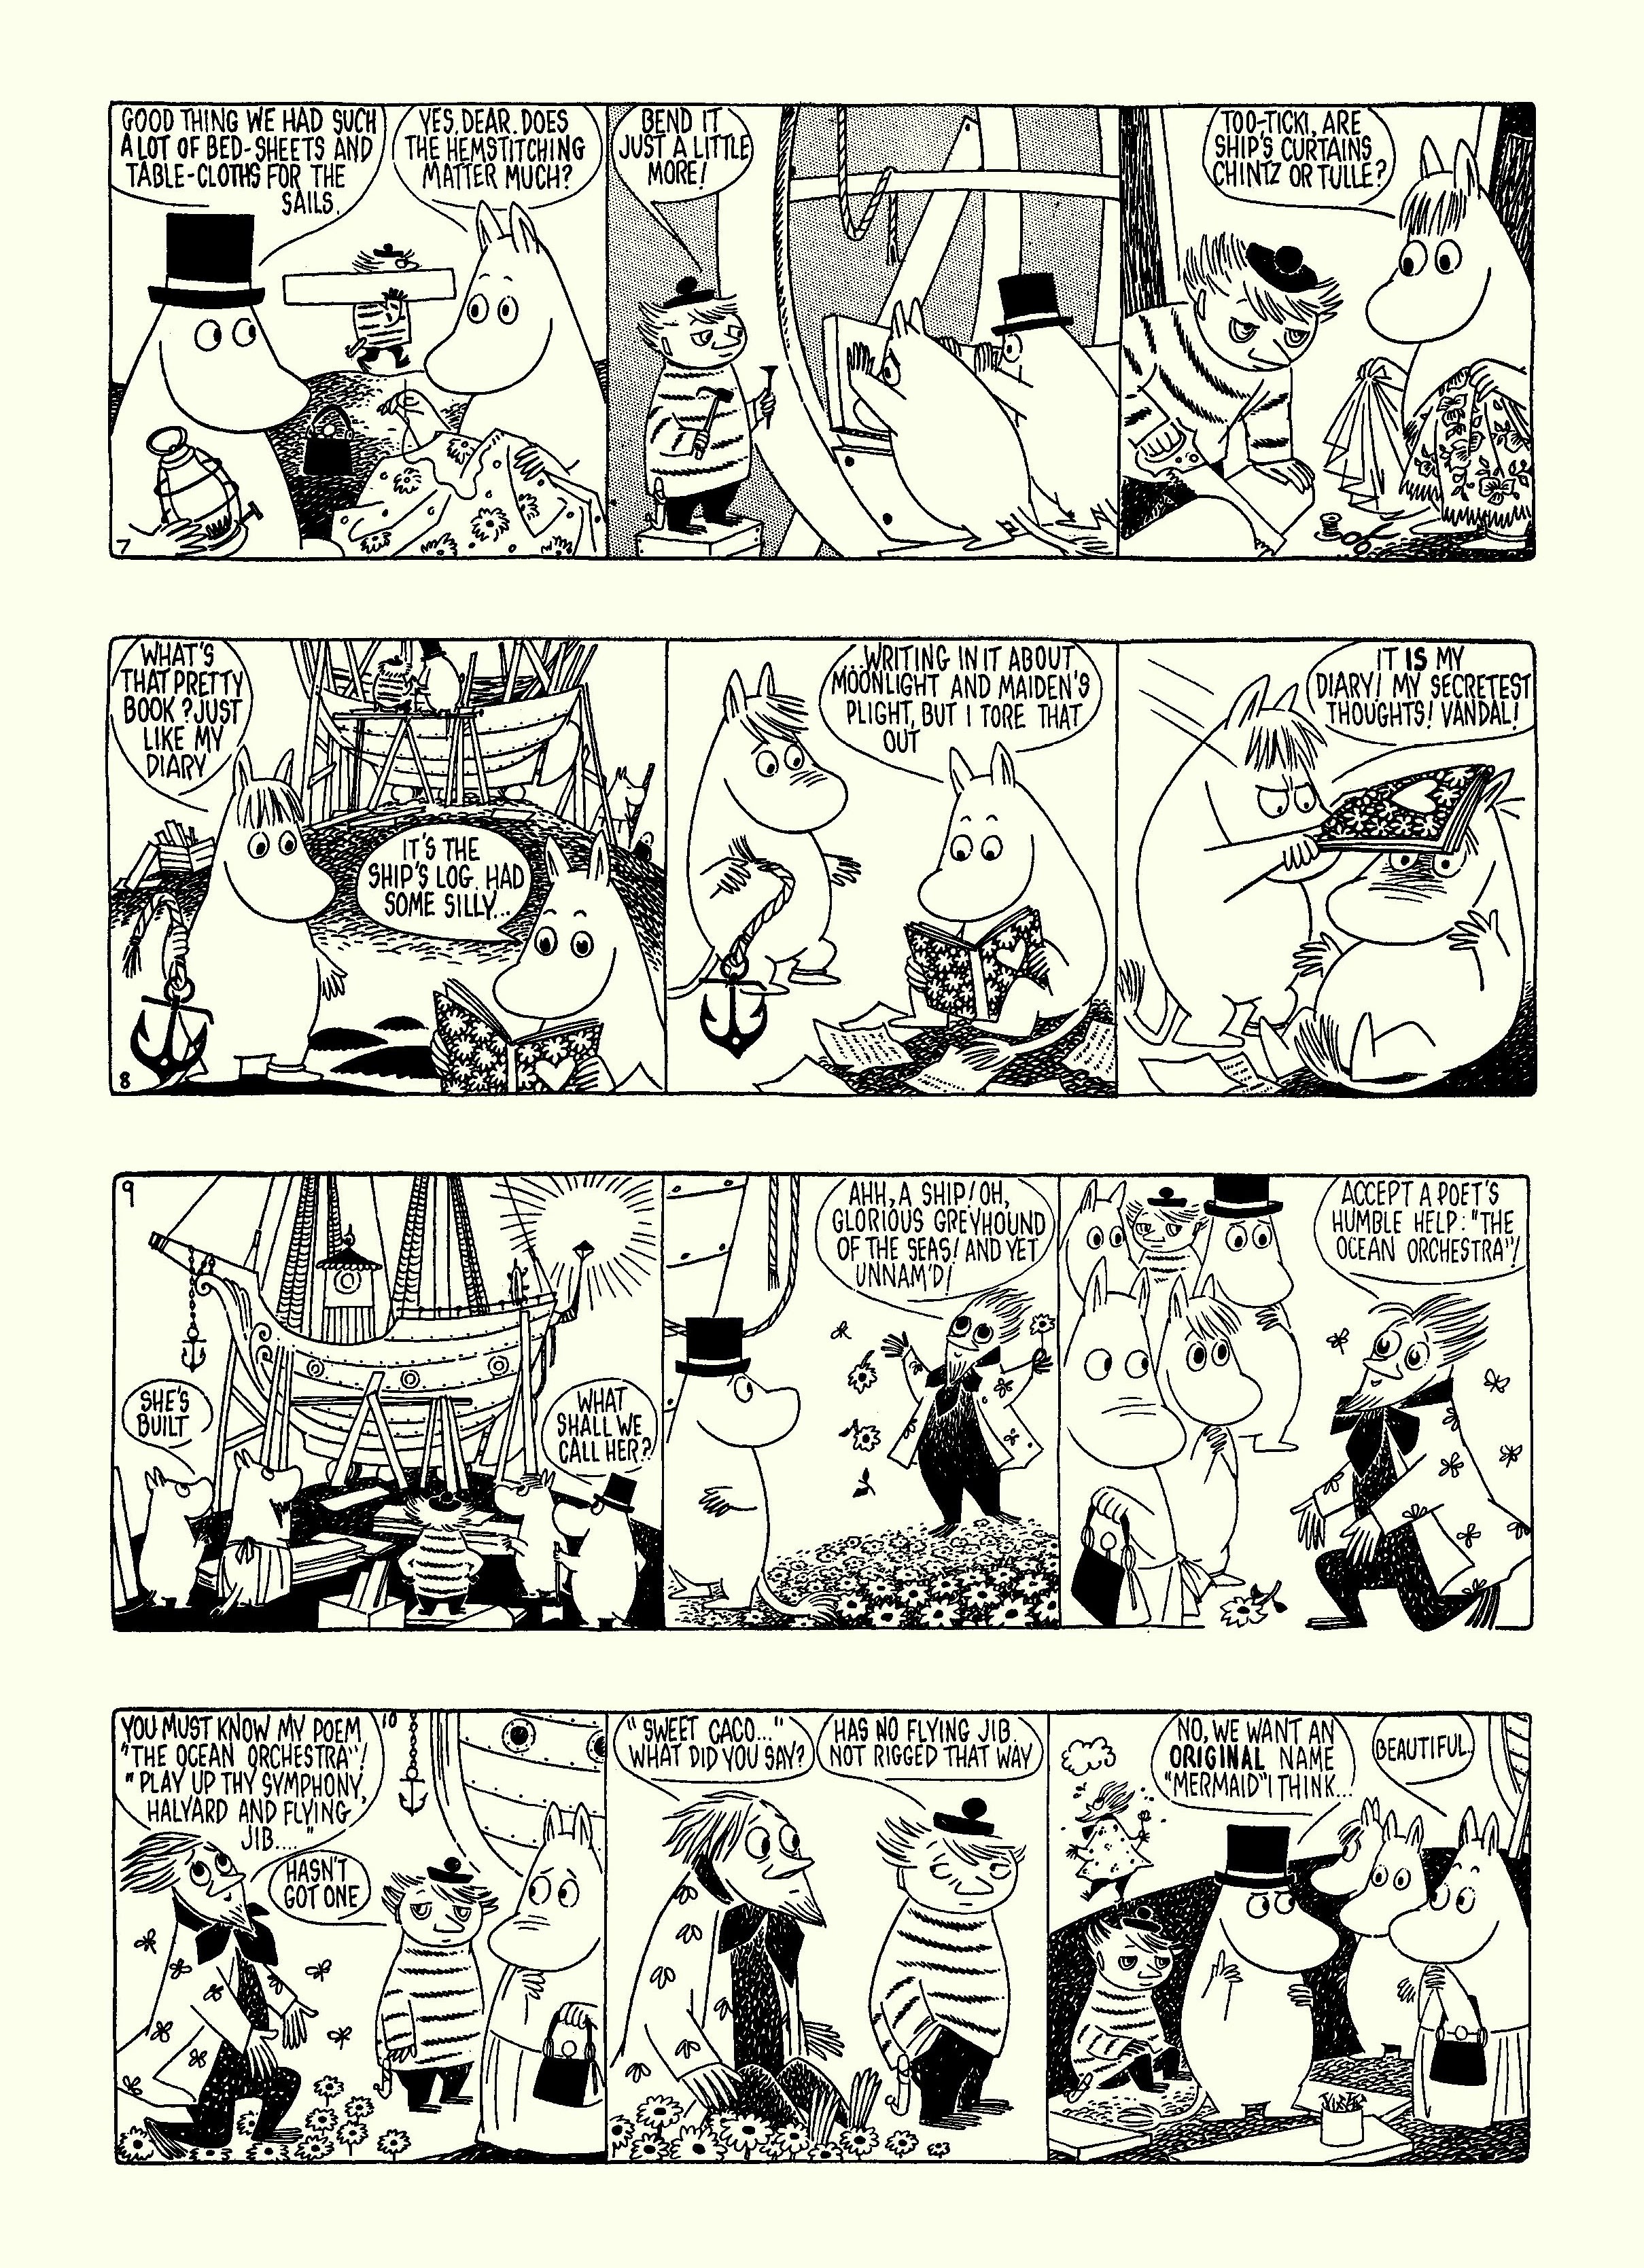 Read online Moomin: The Complete Tove Jansson Comic Strip comic -  Issue # TPB 5 - 33